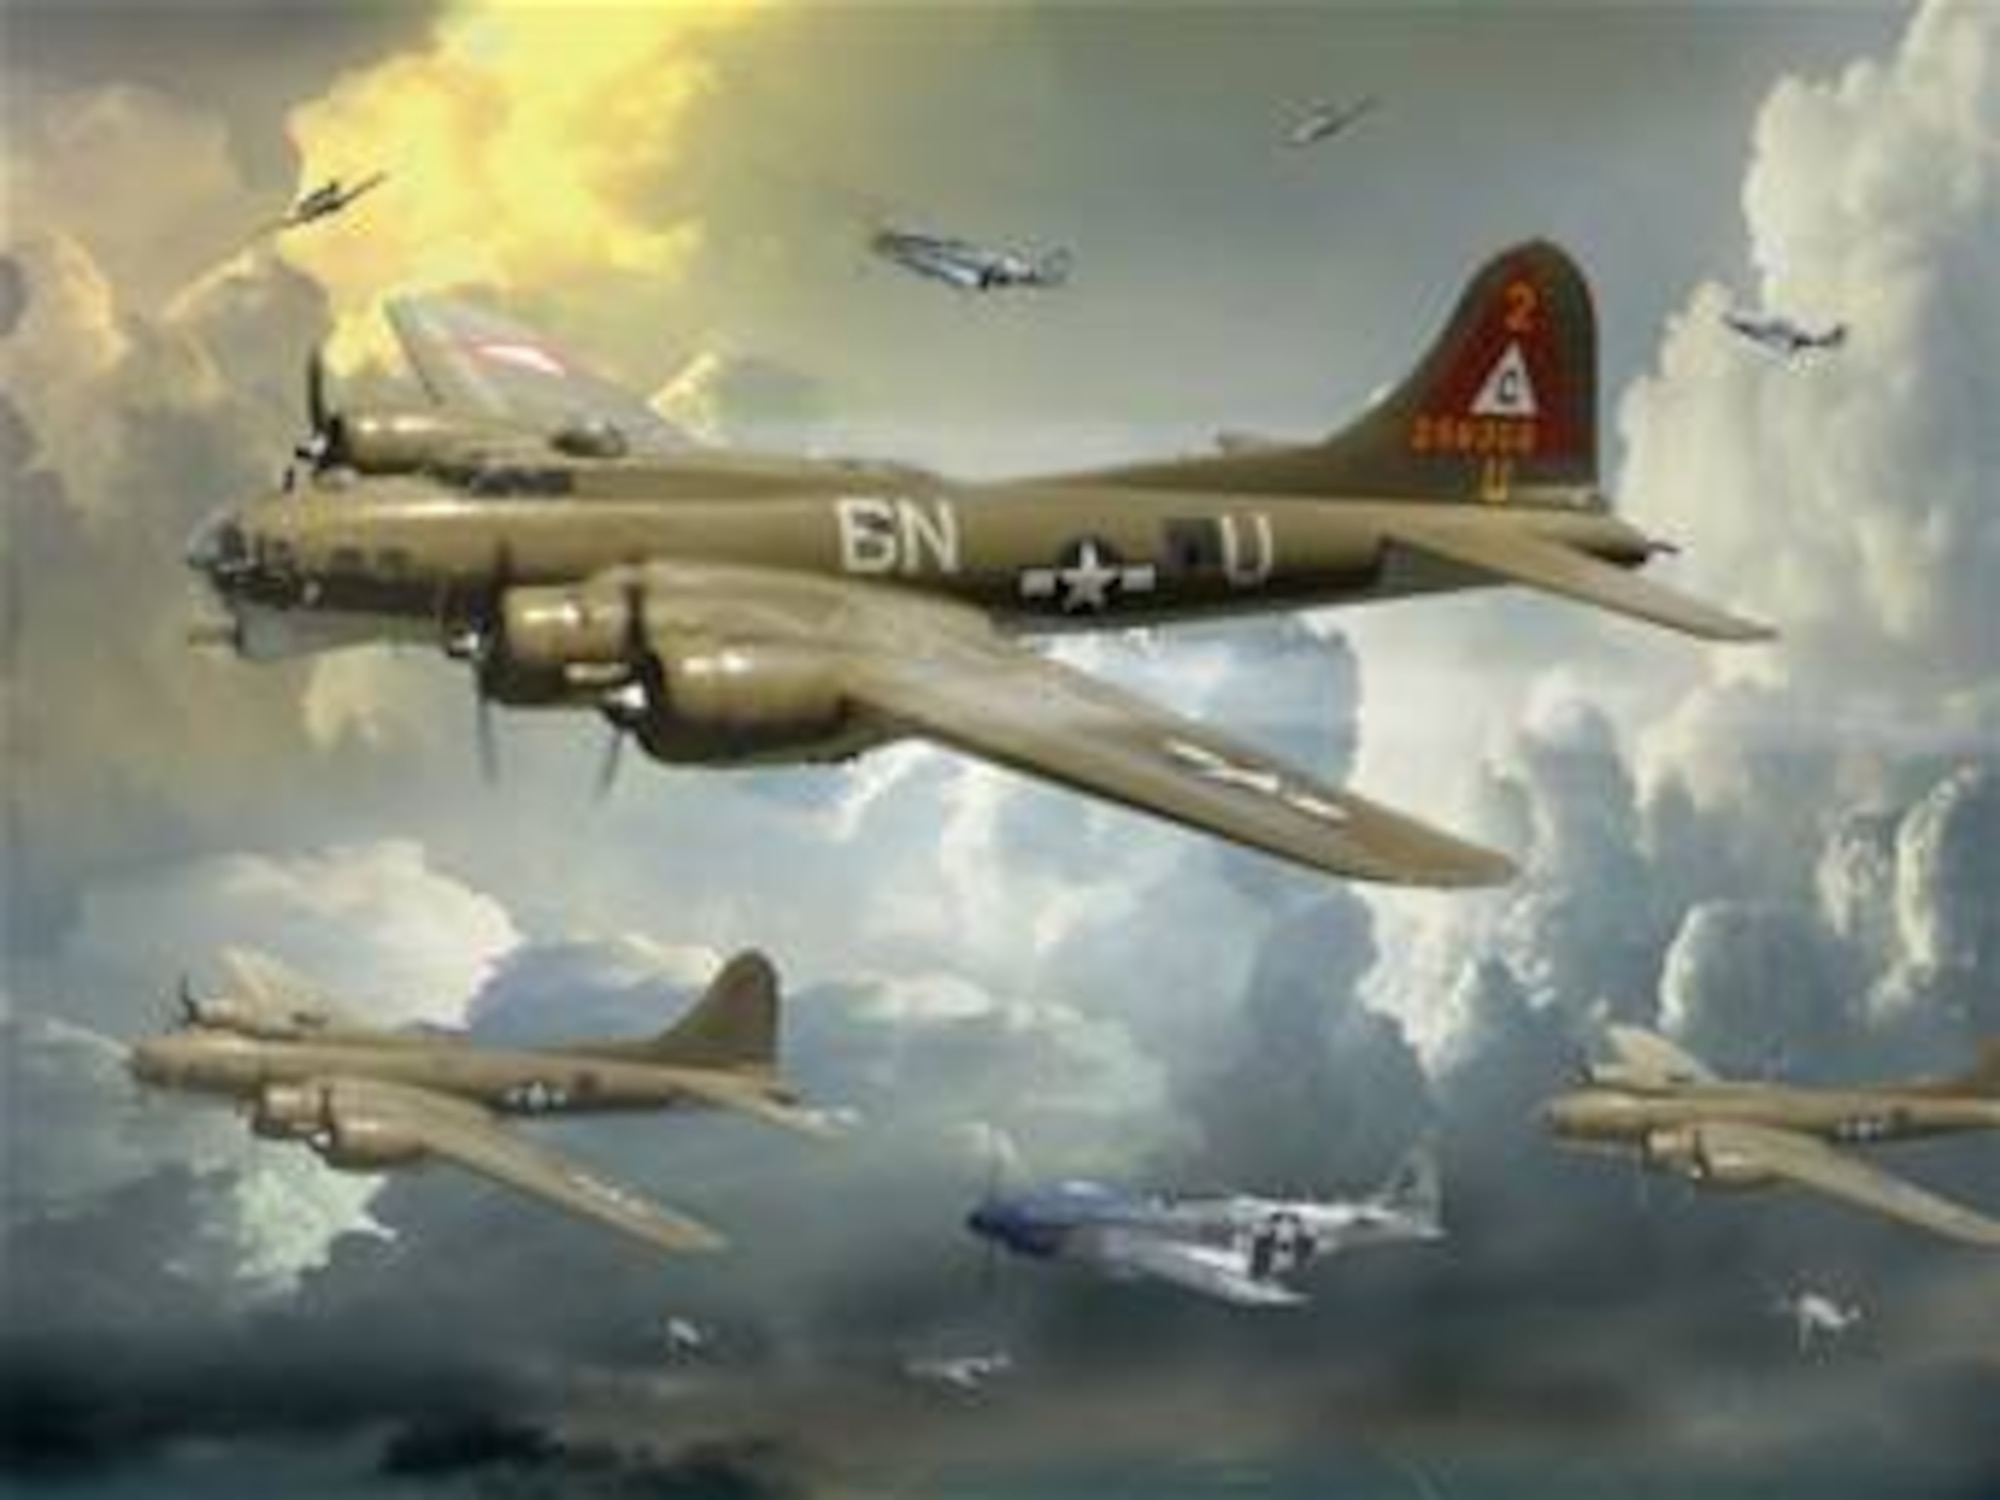 B-17 "Air Mission WWII"  created by Ken Chandler. This image is 10x7.5 @ 300 ppi. Printable (PDF) files for this image, up to 18x24 inches @ 300 ppi, are avilable to members of the armed forces by contacting art.afnews.af.mil.  This image is copyrighted and is the property of Ken Chandler and is available only to members of the armed forces and military organizations.